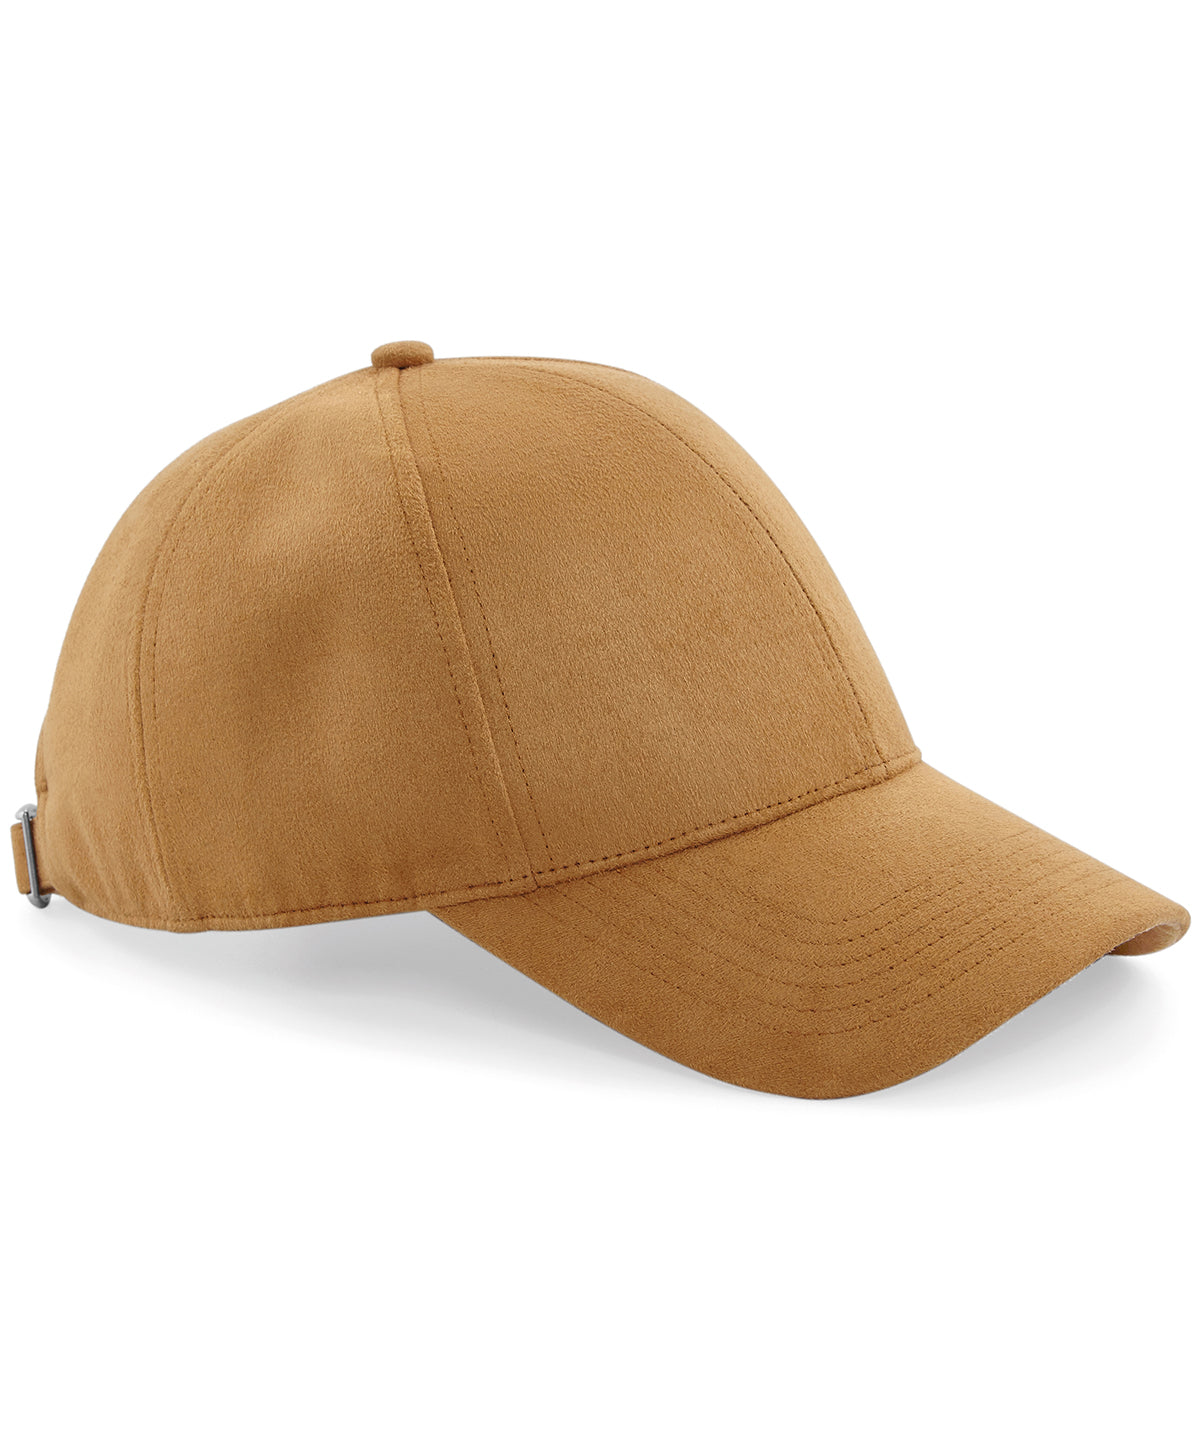 Personalised Caps - Light Brown Beechfield Faux suede 6-panel cap